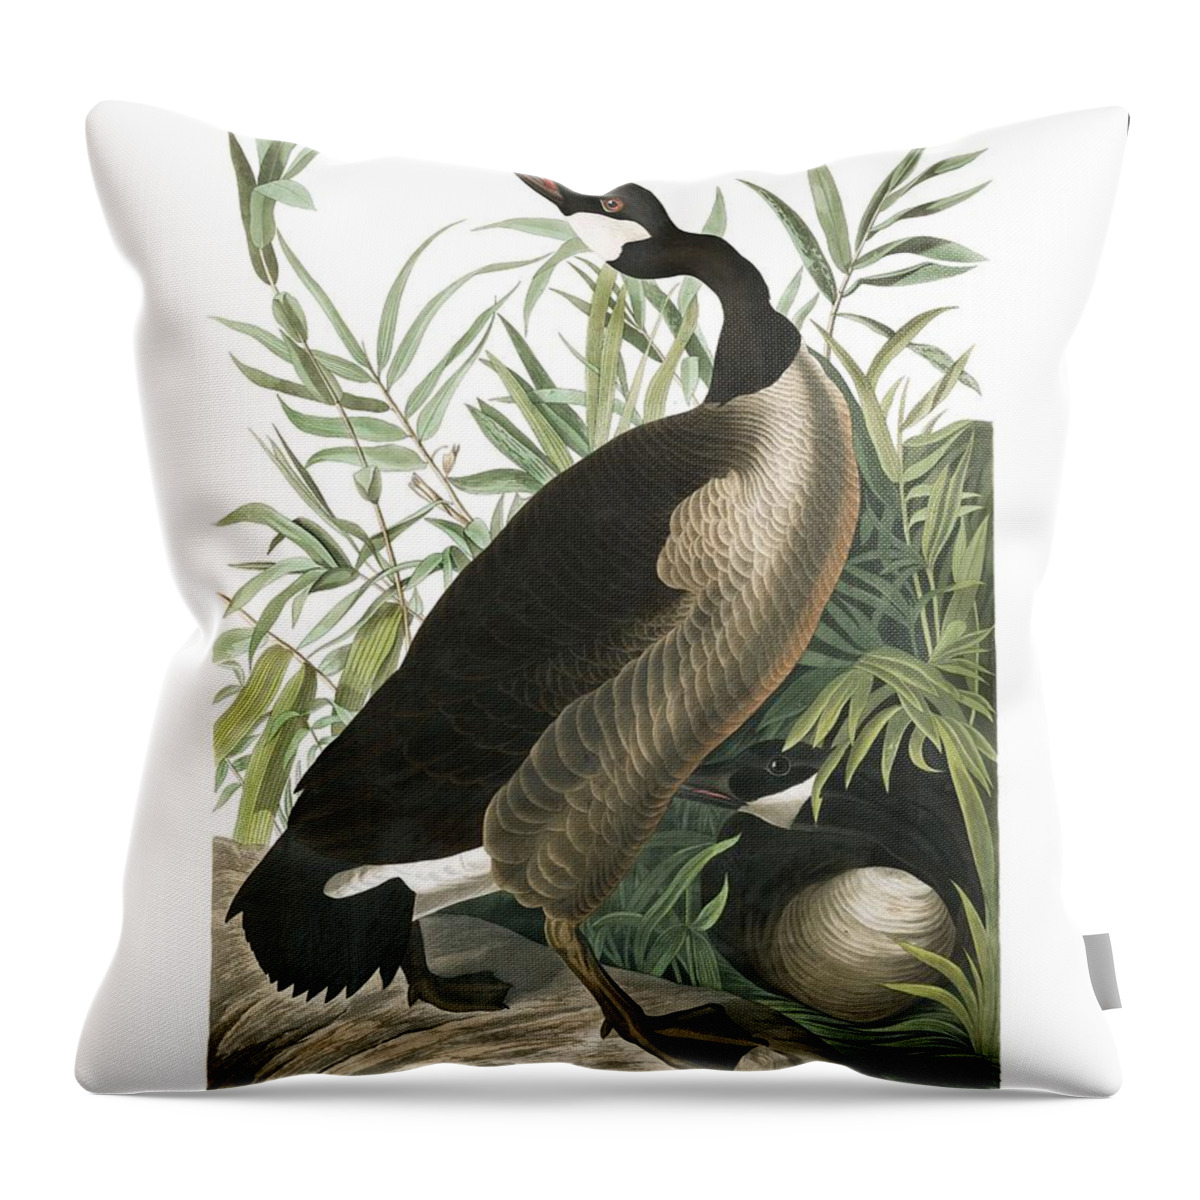 Bird Throw Pillow featuring the painting Canada Goose by John Audubon by Celestial Images